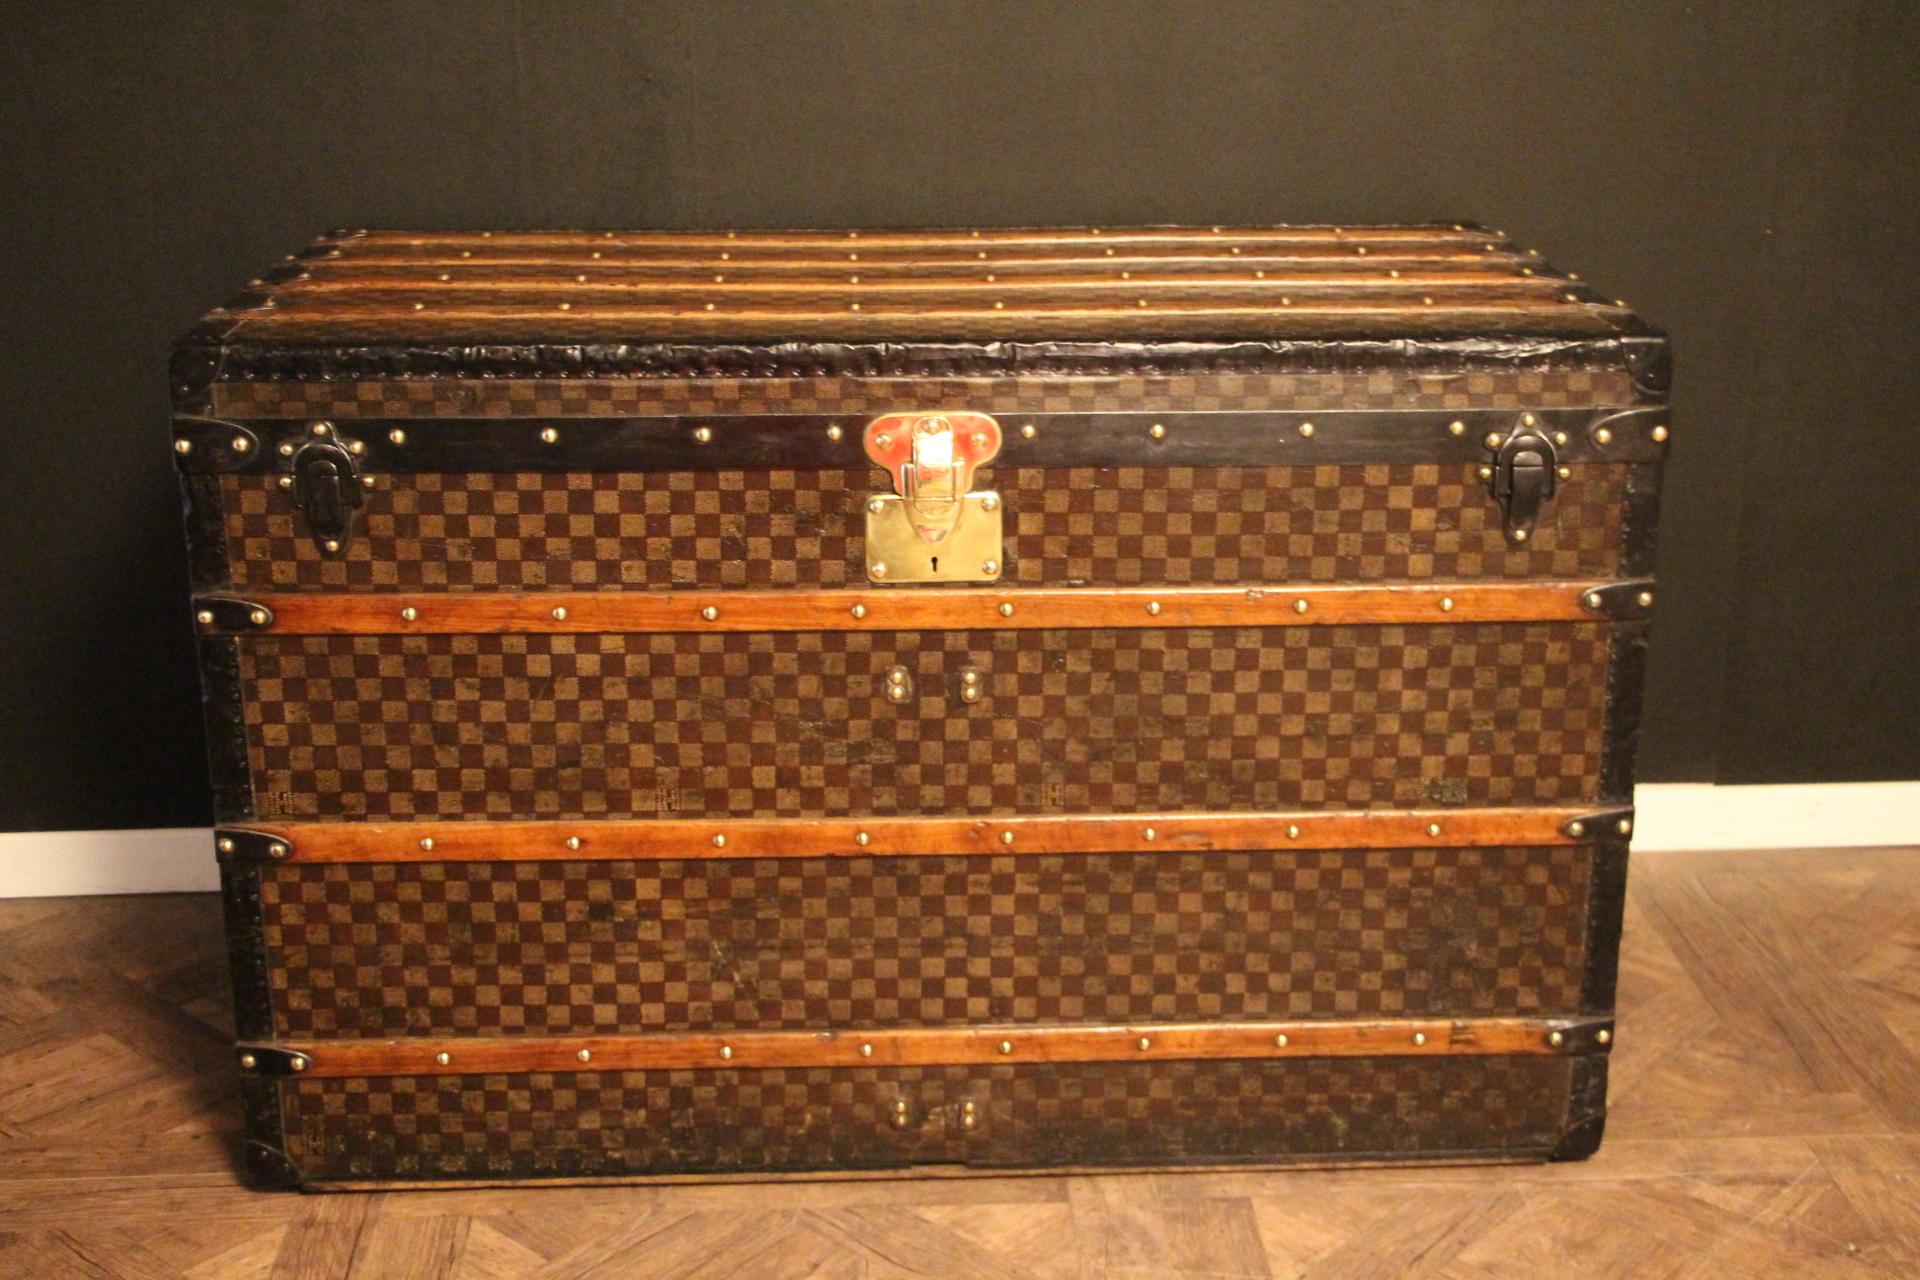 This extra large Louis Vuitton features the very sought after checkers pattern.In some of the checkers, it is written 